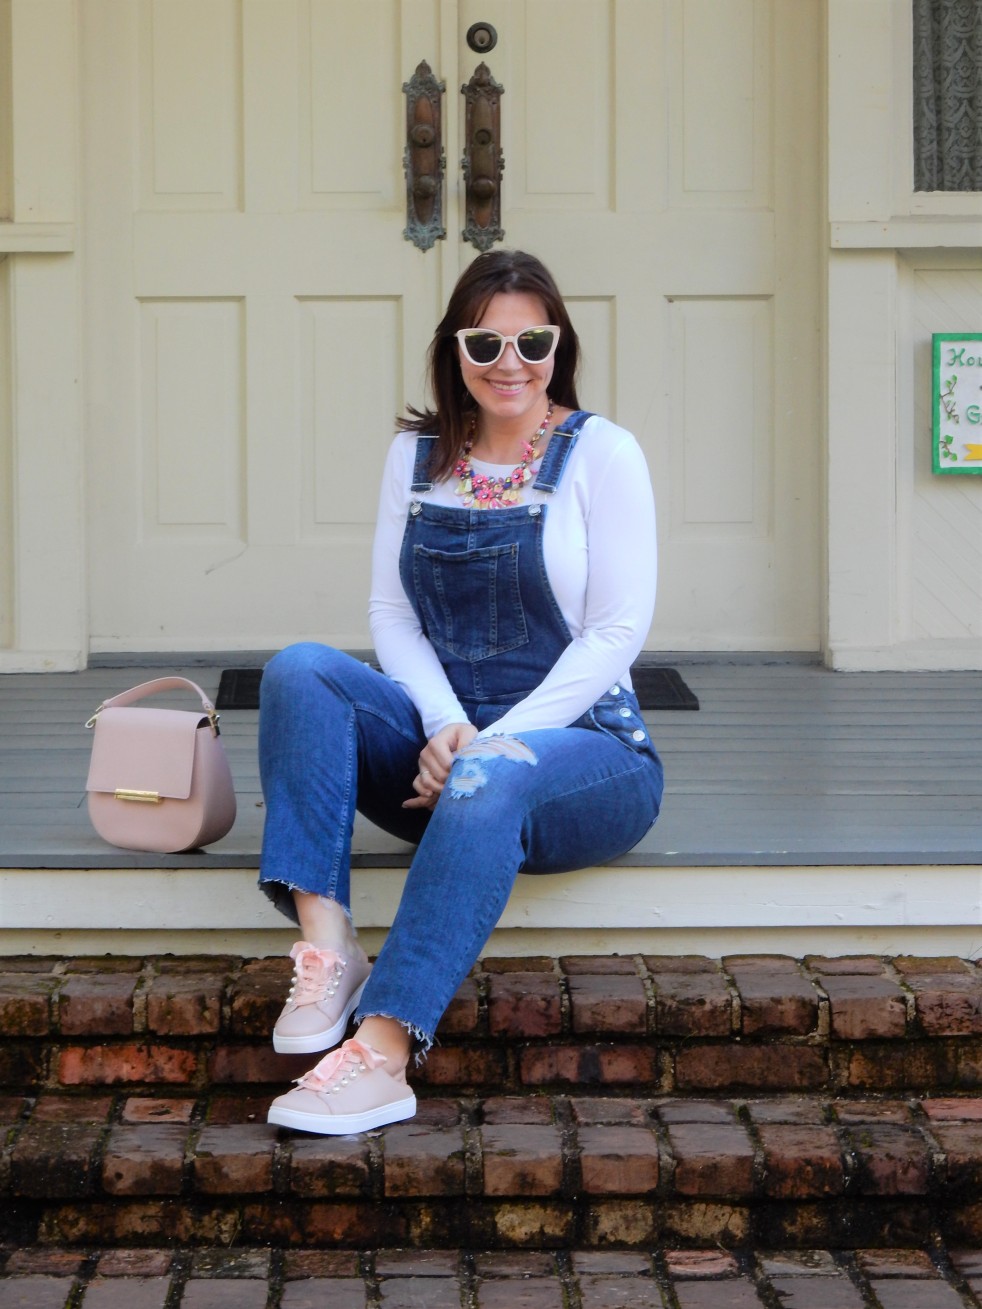 How to style overalls, how to wear overalls, how to look cute in overalls, overalls, pink slides, kate spade byrdie bag, Pink sunglasses, spring fashion trends, spring clothes, eden gardens, eden gardens state park, blogger fashion tips, styling tips, Sarah Meyer, Sarah In Style